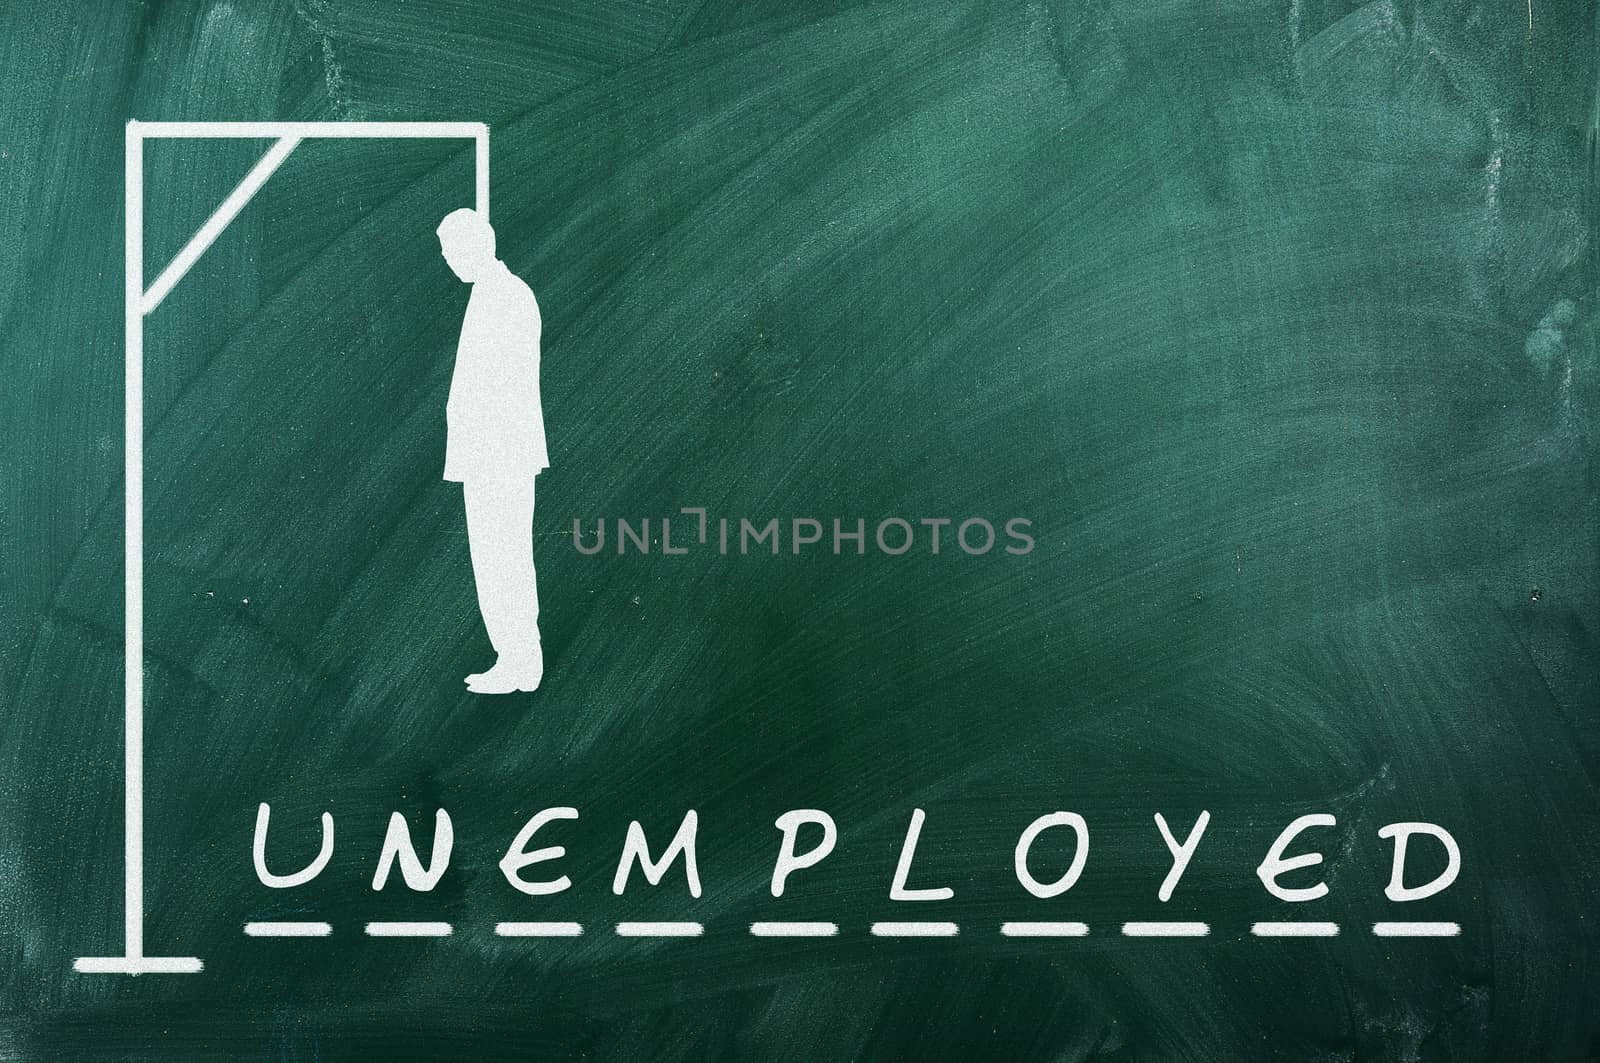 Hangman game on green chalkboard ,concept of unemployment